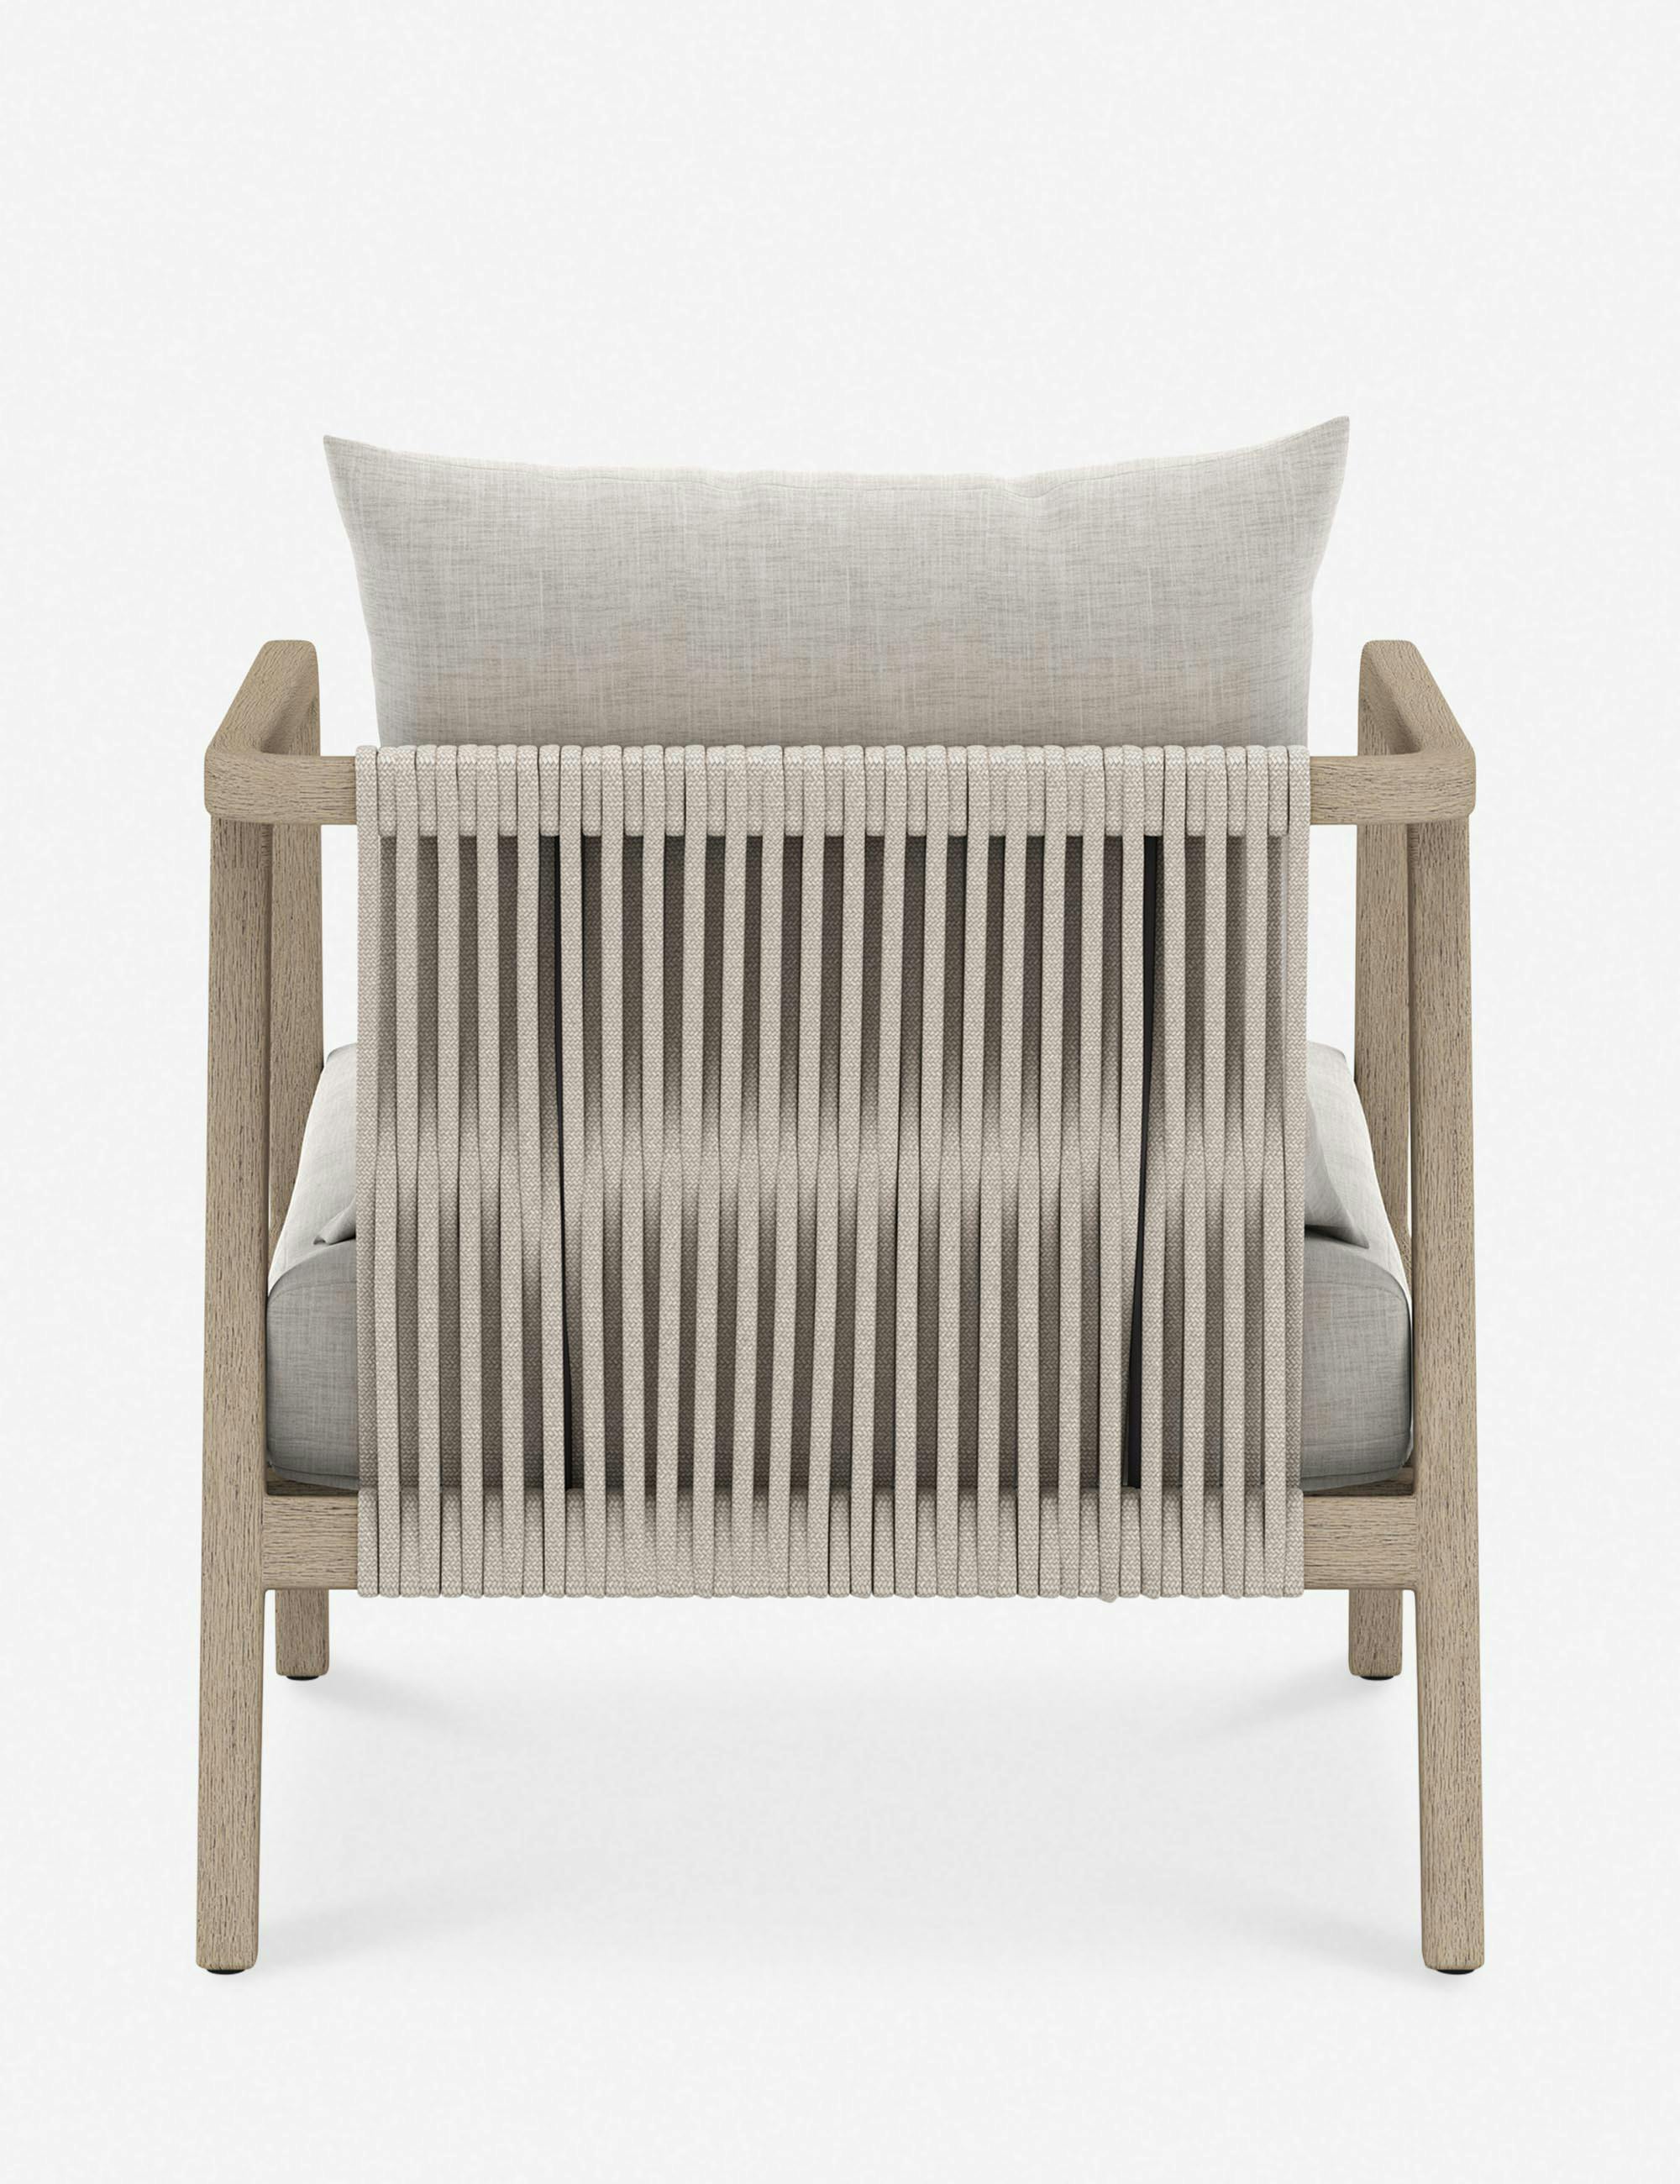 Contemporary Brown Woven Rope Outdoor Accent Chair